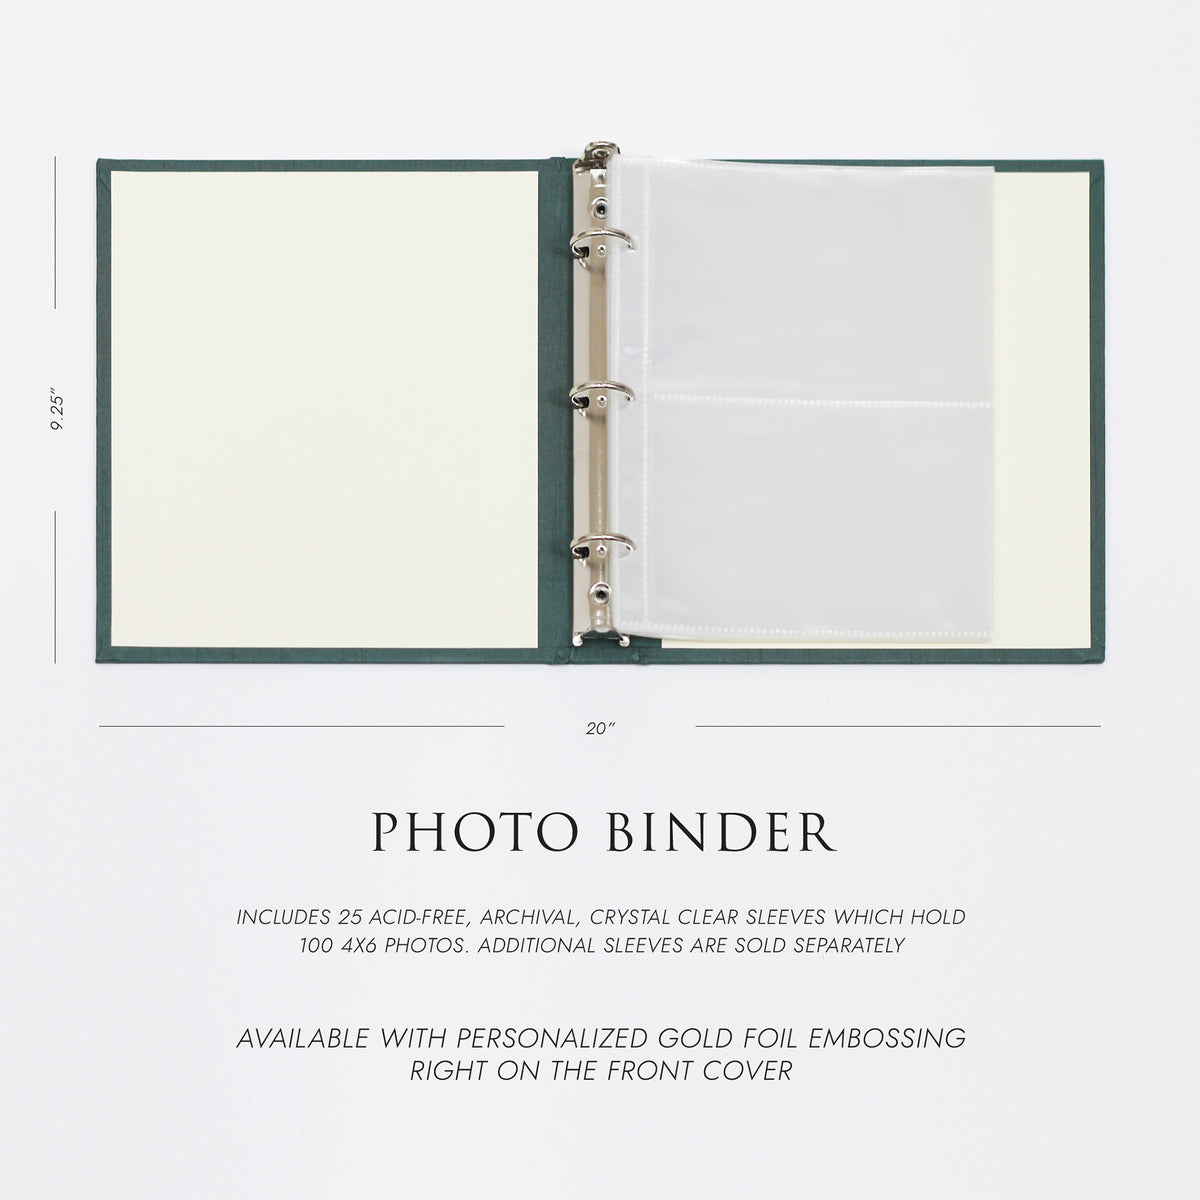 Medium Photo Binder For 4x6 Photos | Cover: Jade Silk | Available Personalized